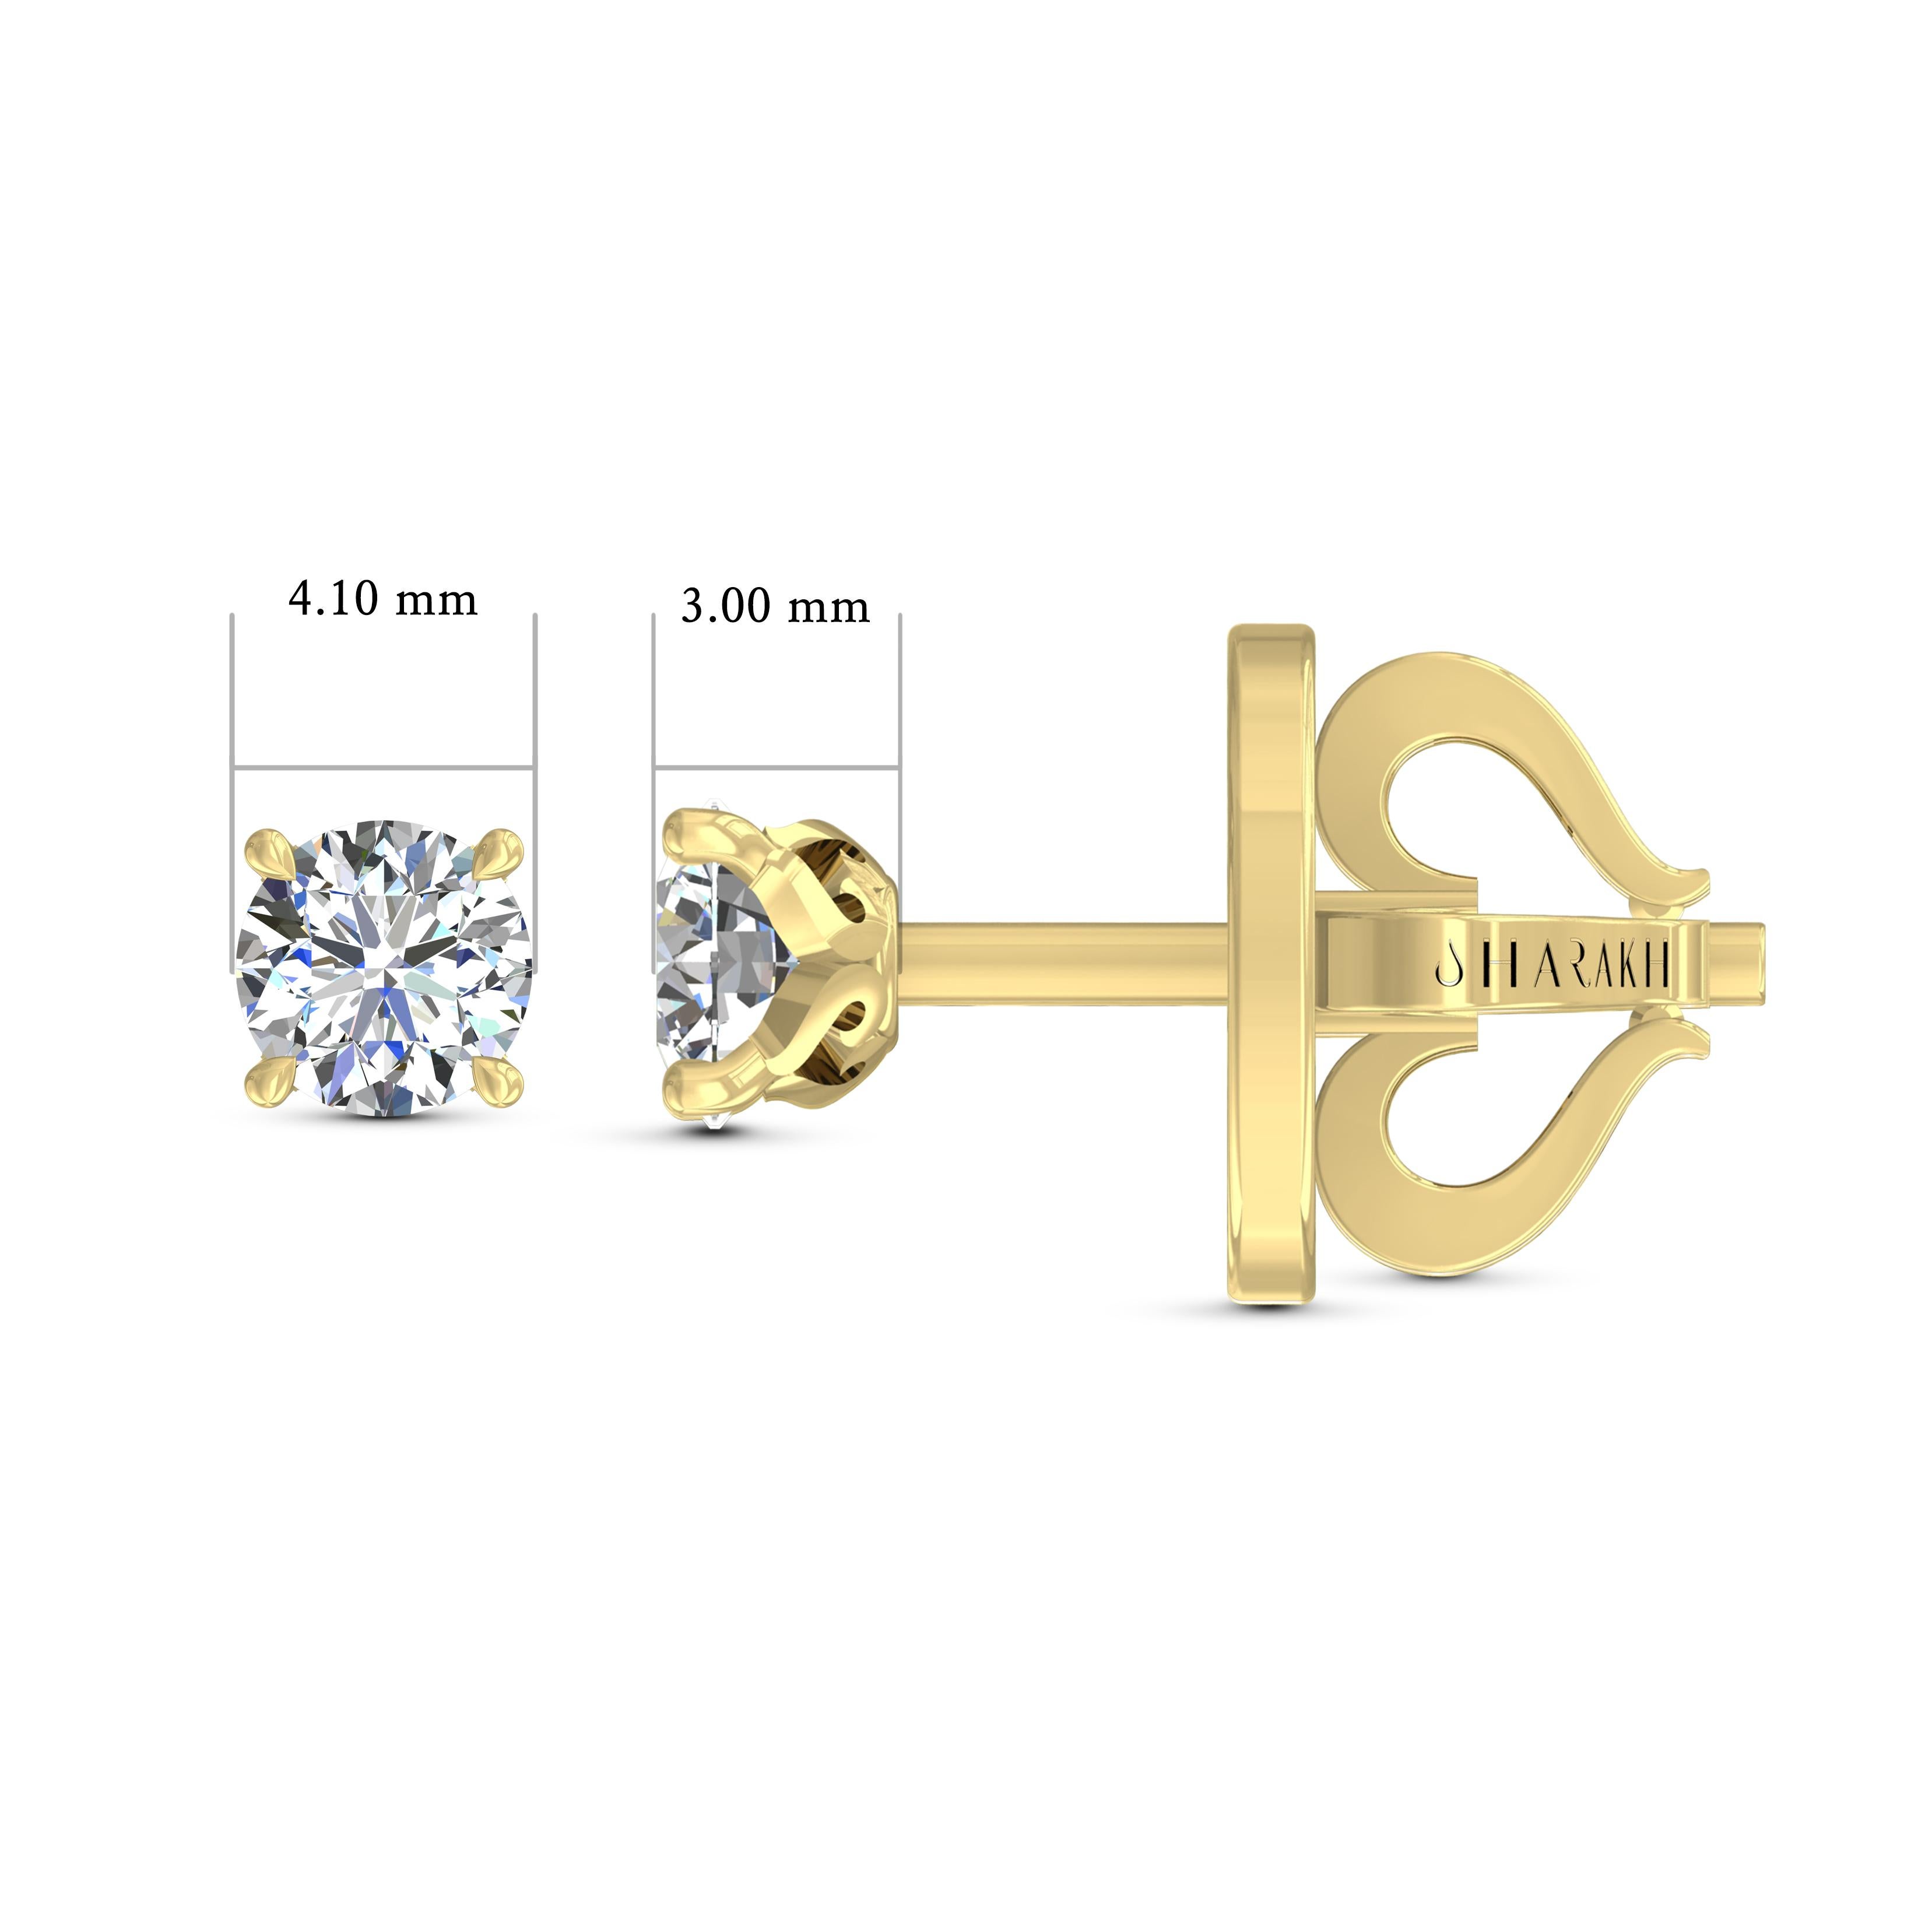 Round Cut Harakh GIA Certified 0.54 Carat D Color VS1 Clarity 18 KT Diamond Stud Earrings For Sale